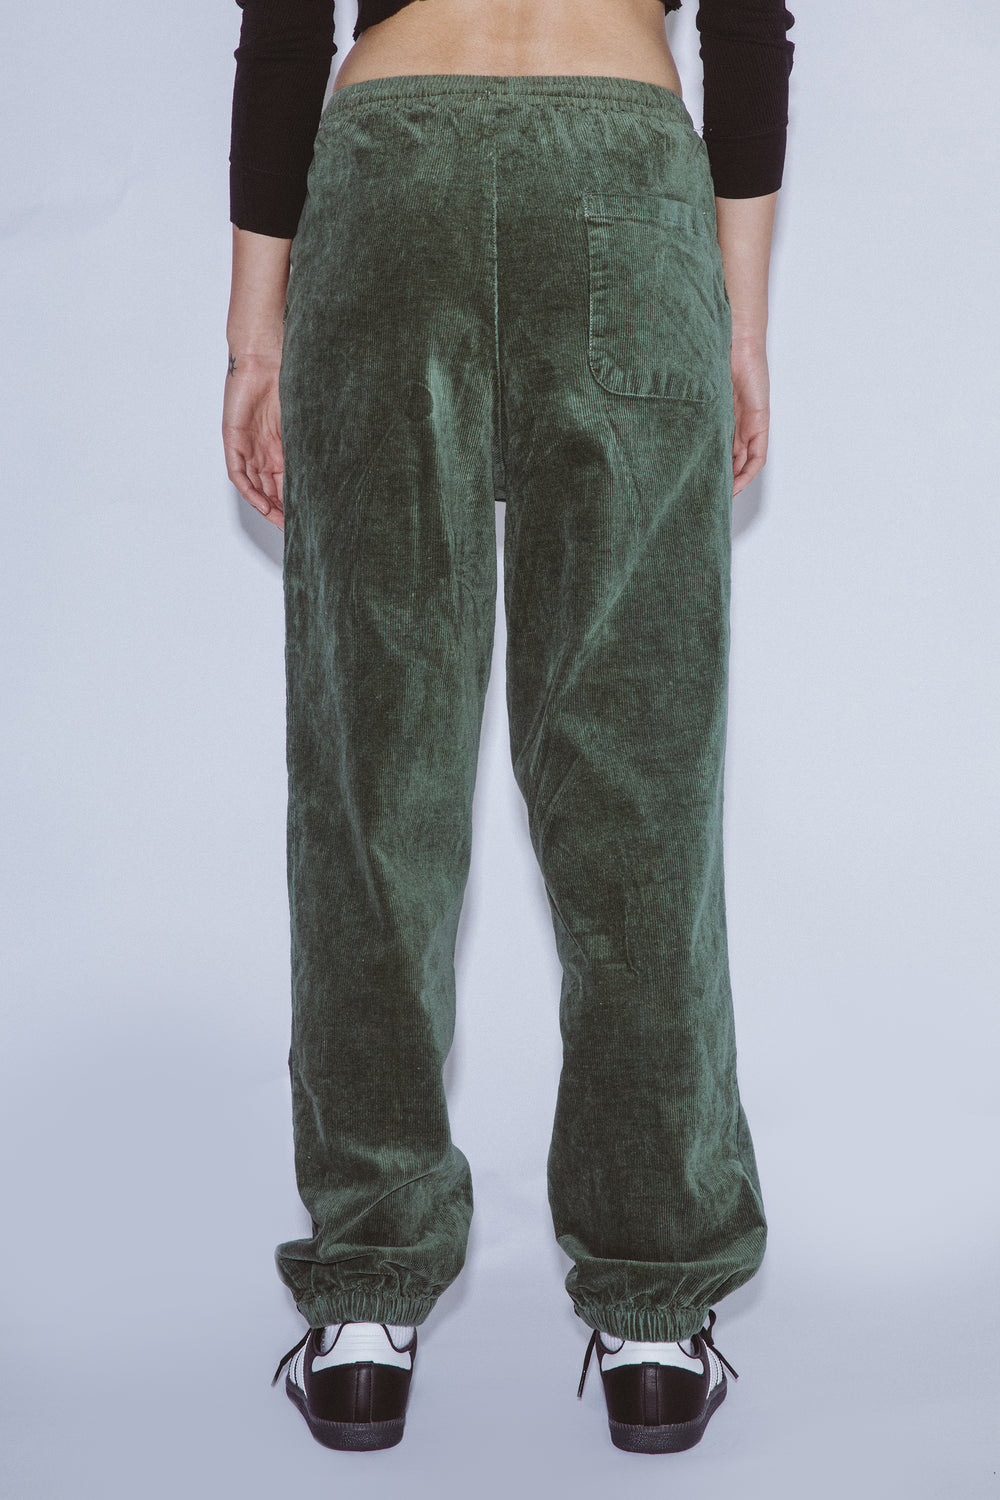 CosIdol Green Pants Bottoms with Fur Long Trousers Warm Fuzzy